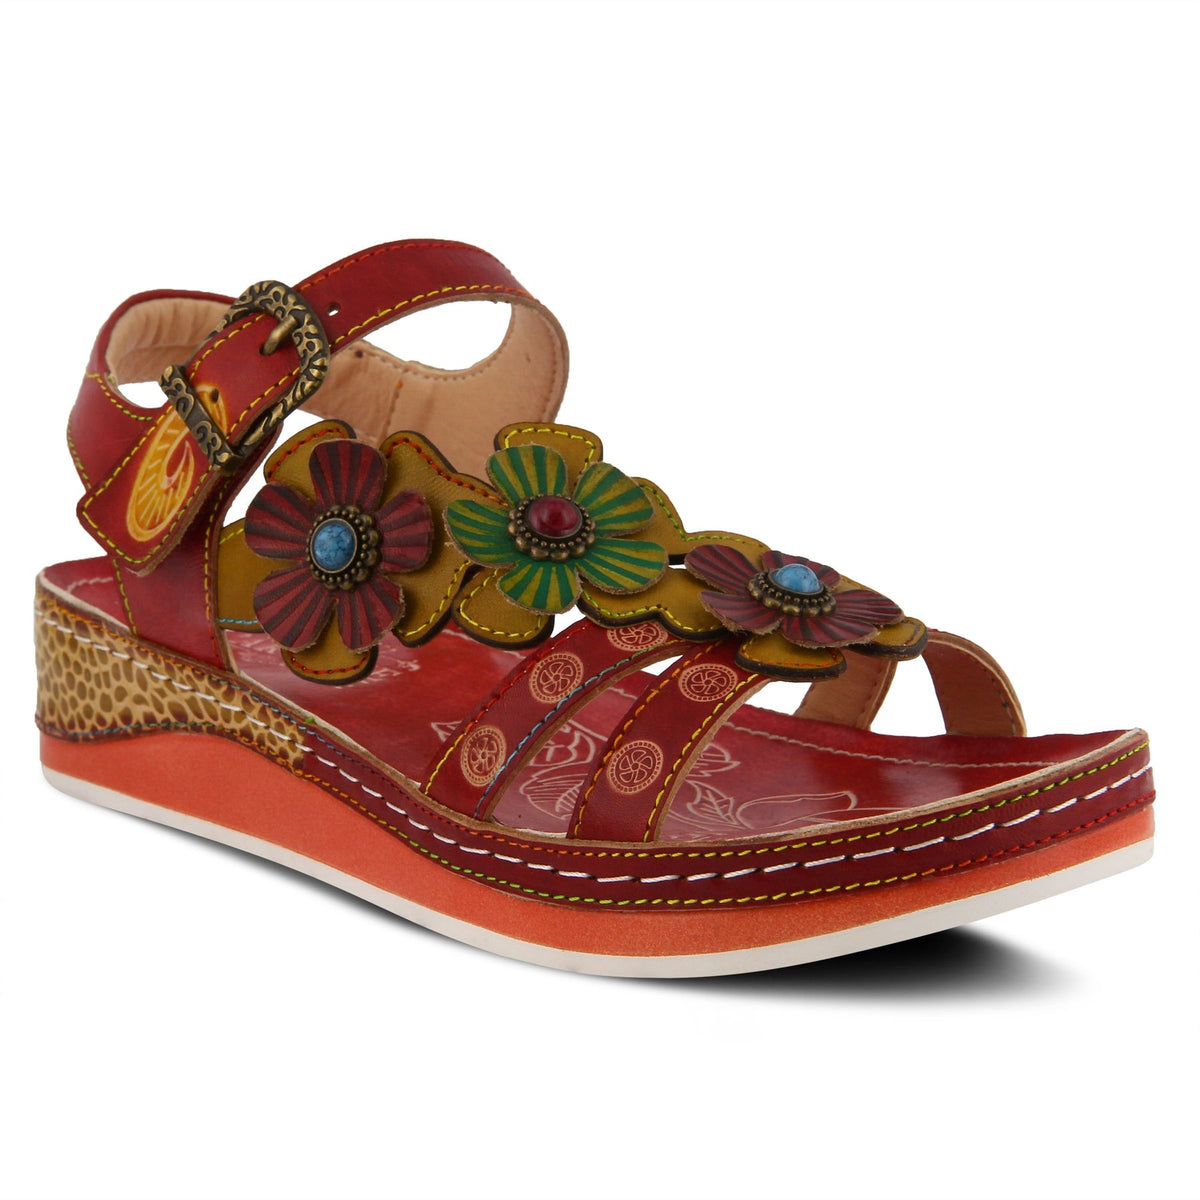 L'Artiste by Springstep Footwear Goodie French inspired, hand-painted leather asymmetrical sandal is full of color and charm with an embossed floral design complimented with dimensional multi-color leather flowers centered with ornate buttons to brighten any outfit!